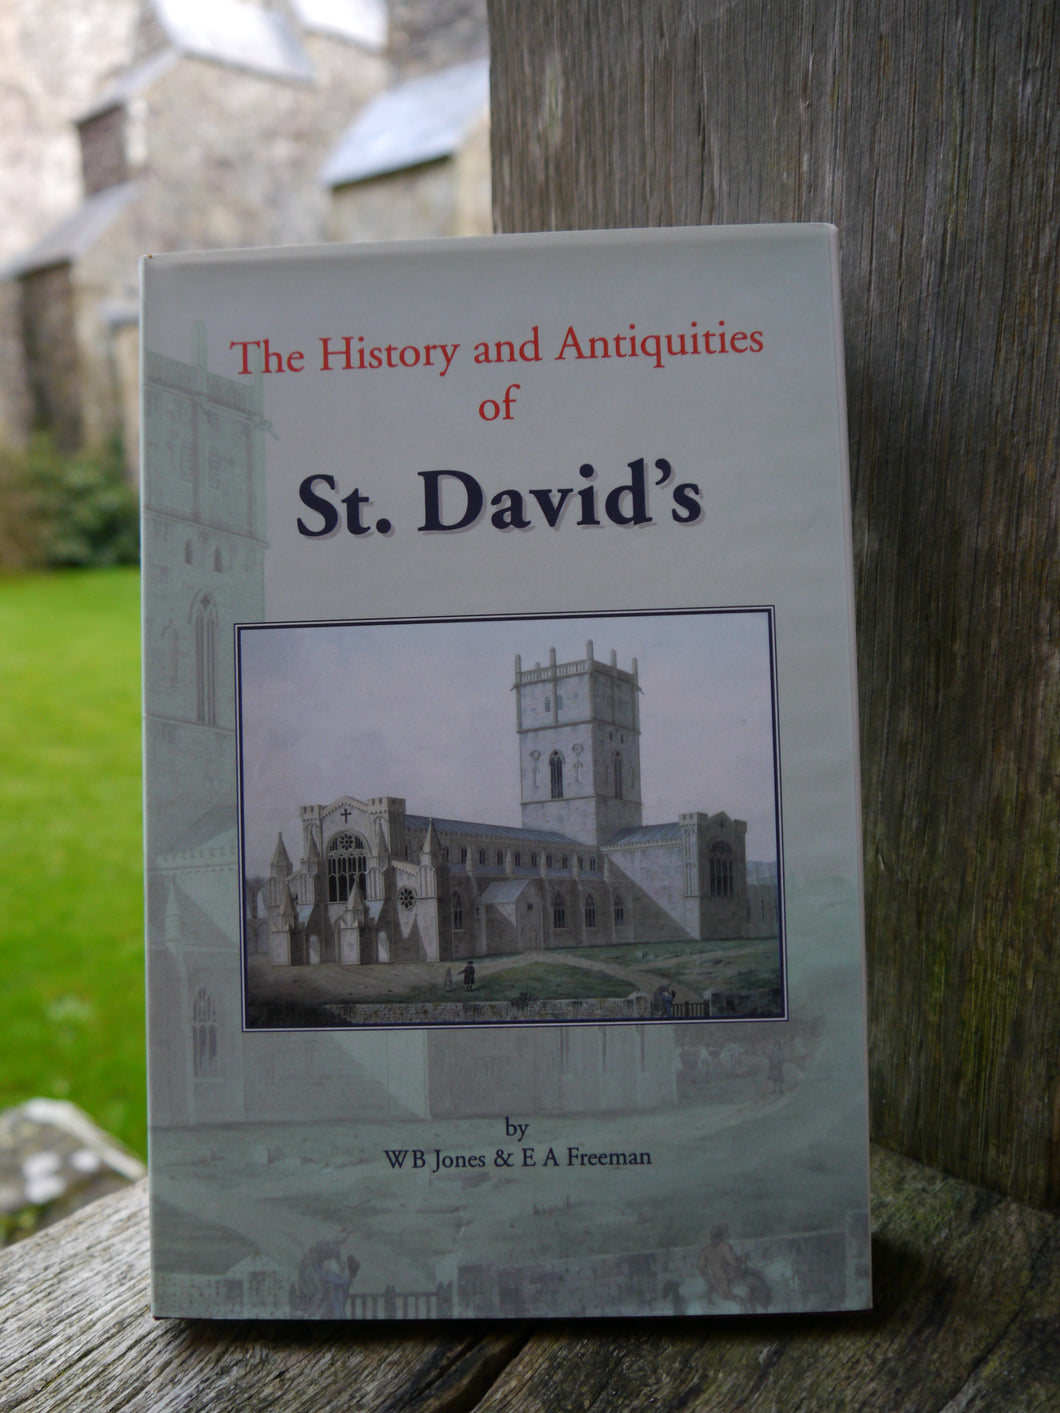 The History & Antiquities of St Davids